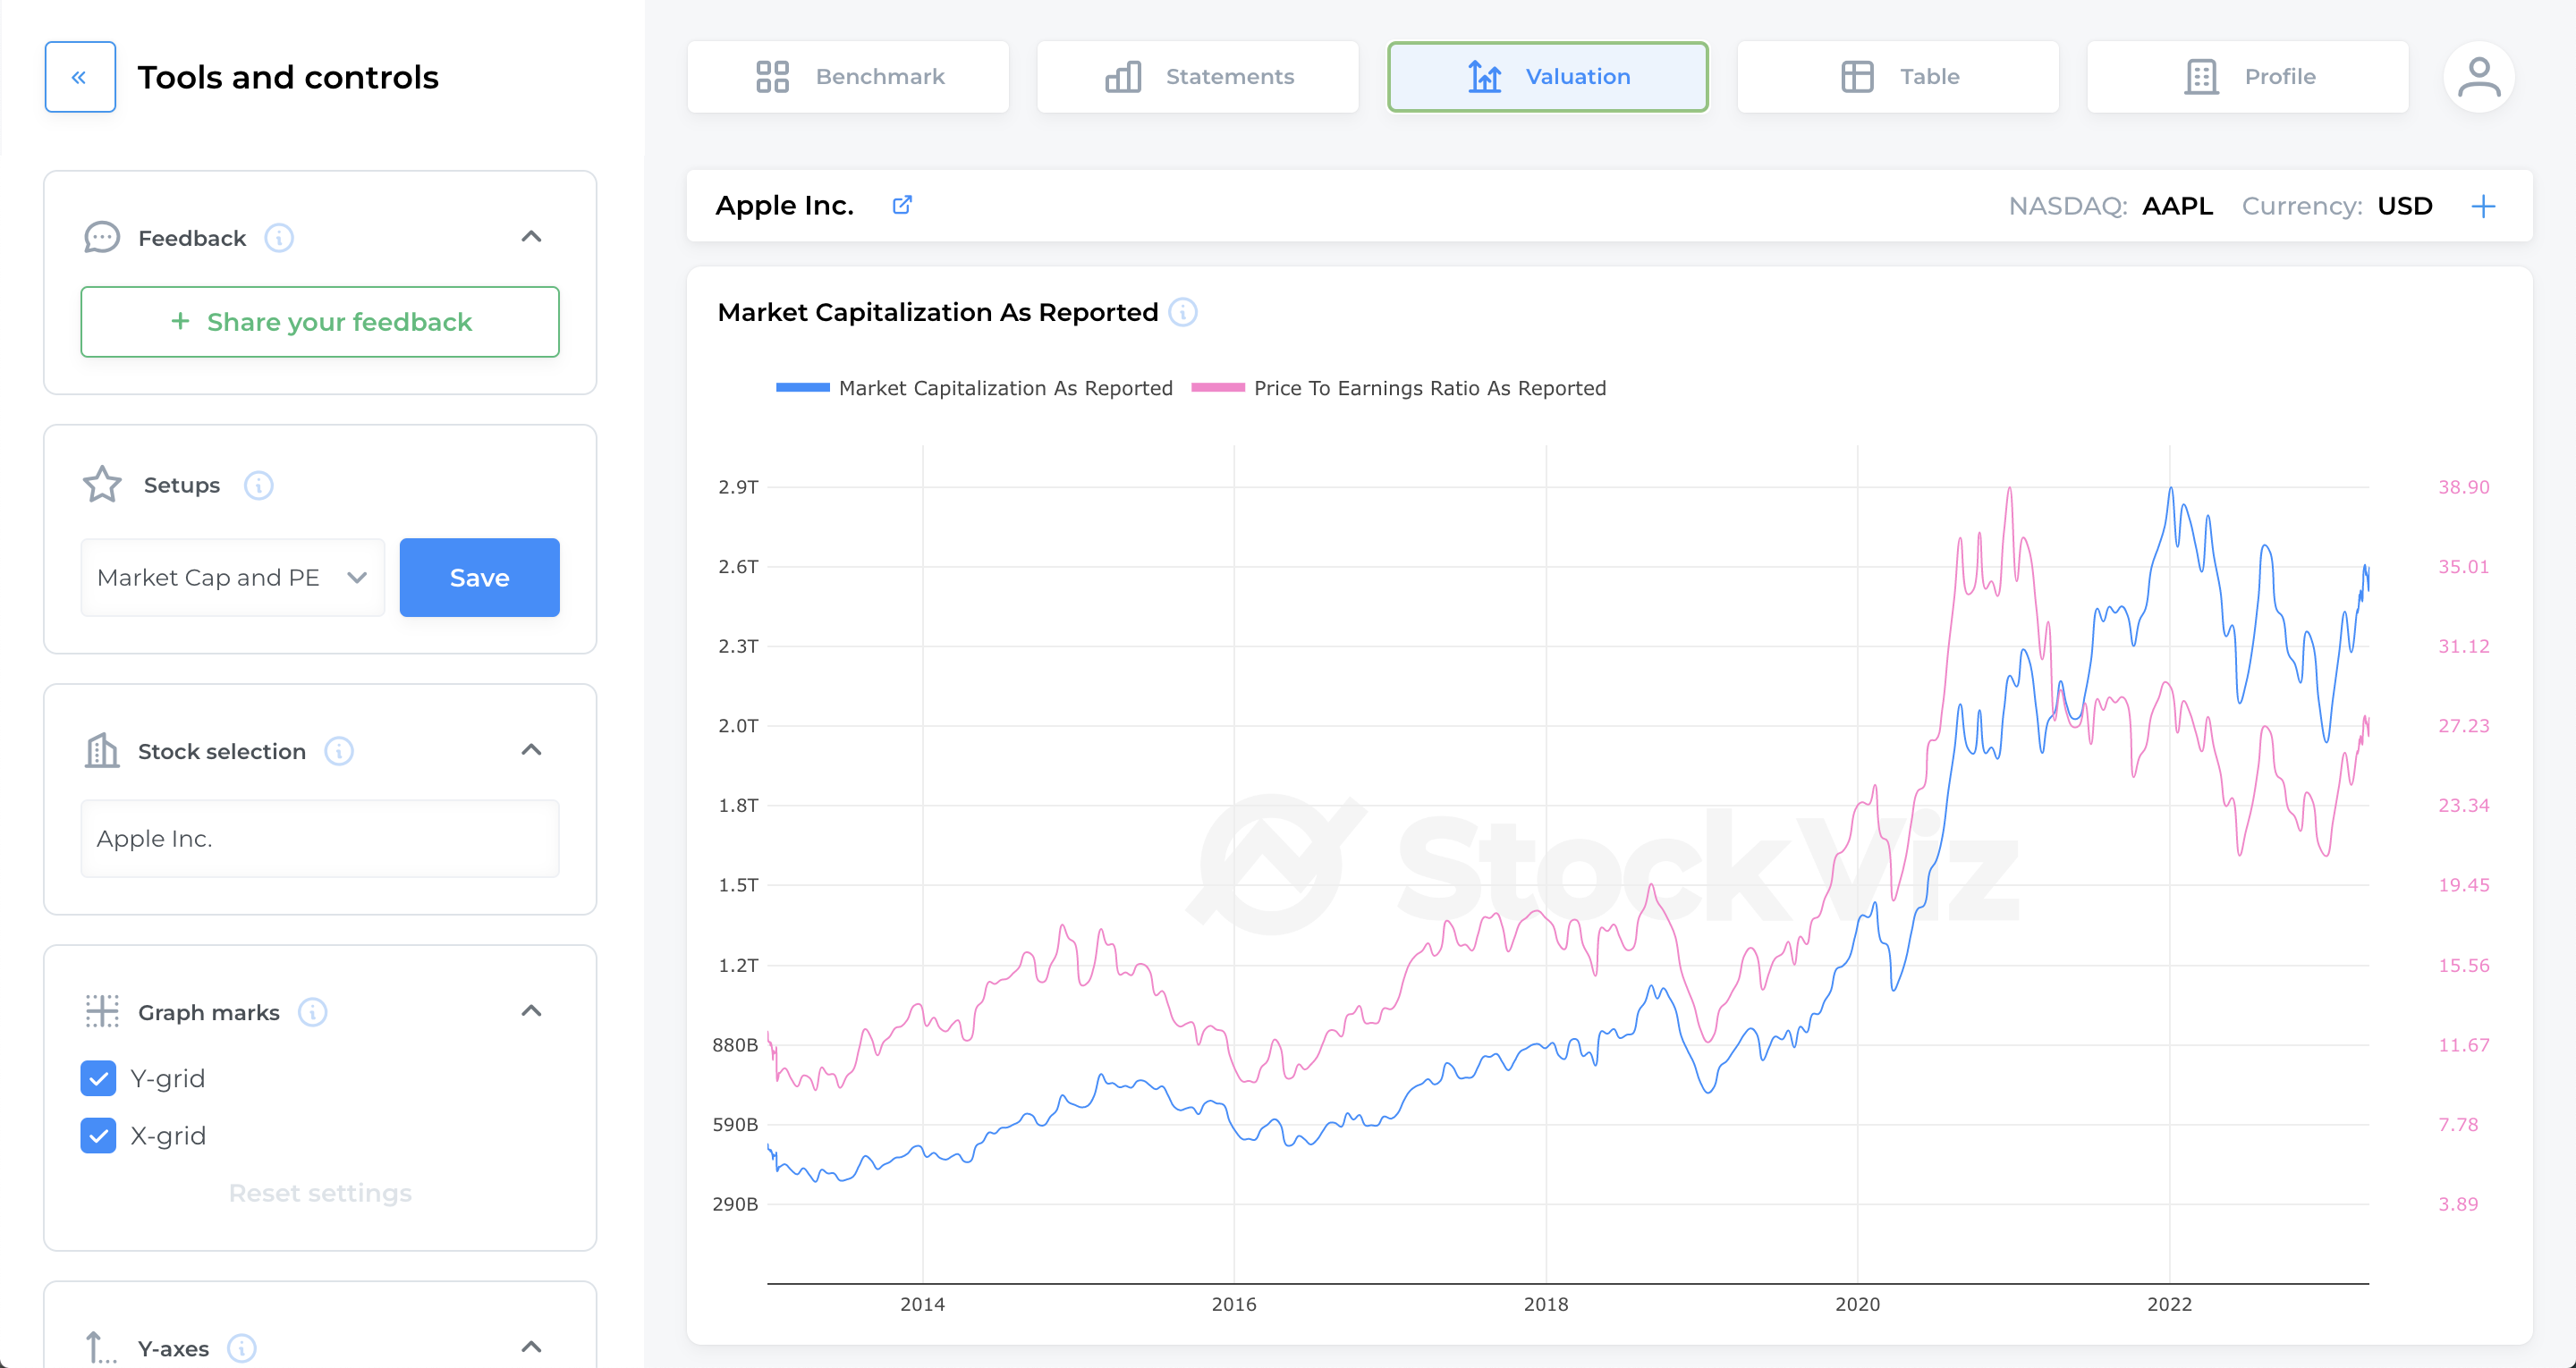 Visualize the evolution of a company's valuation metrics over time.